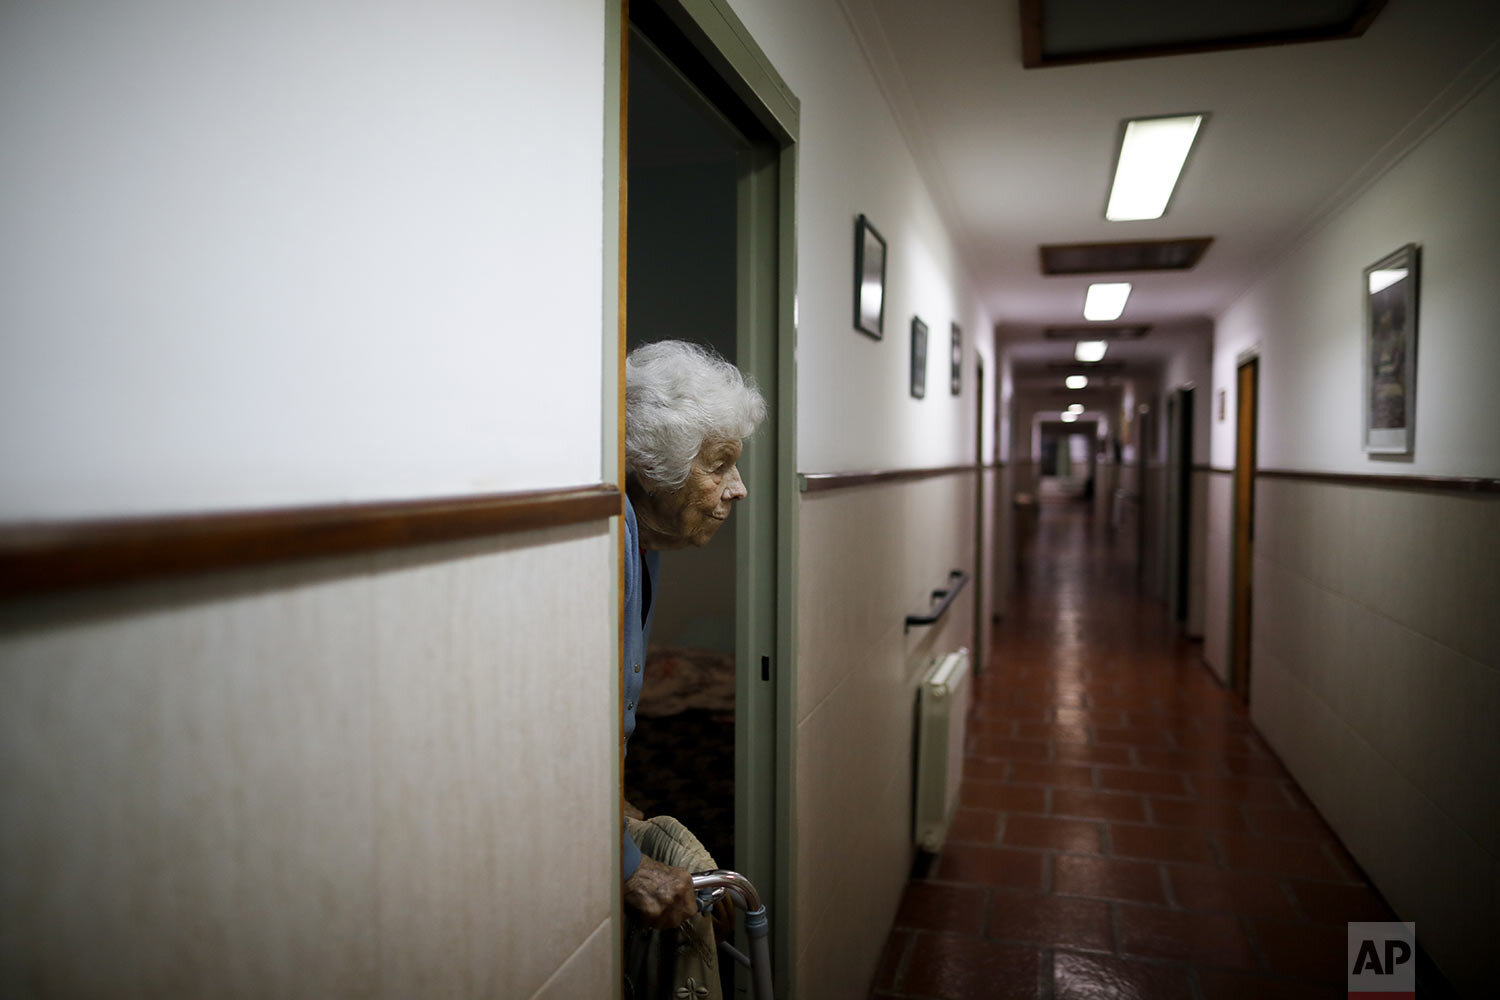  Delia Solbach heads to bed at the Reminiscencias residence in Tandil, Argentina, Sunday, April 4, 2021. (AP Photo/Natacha Pisarenko) 